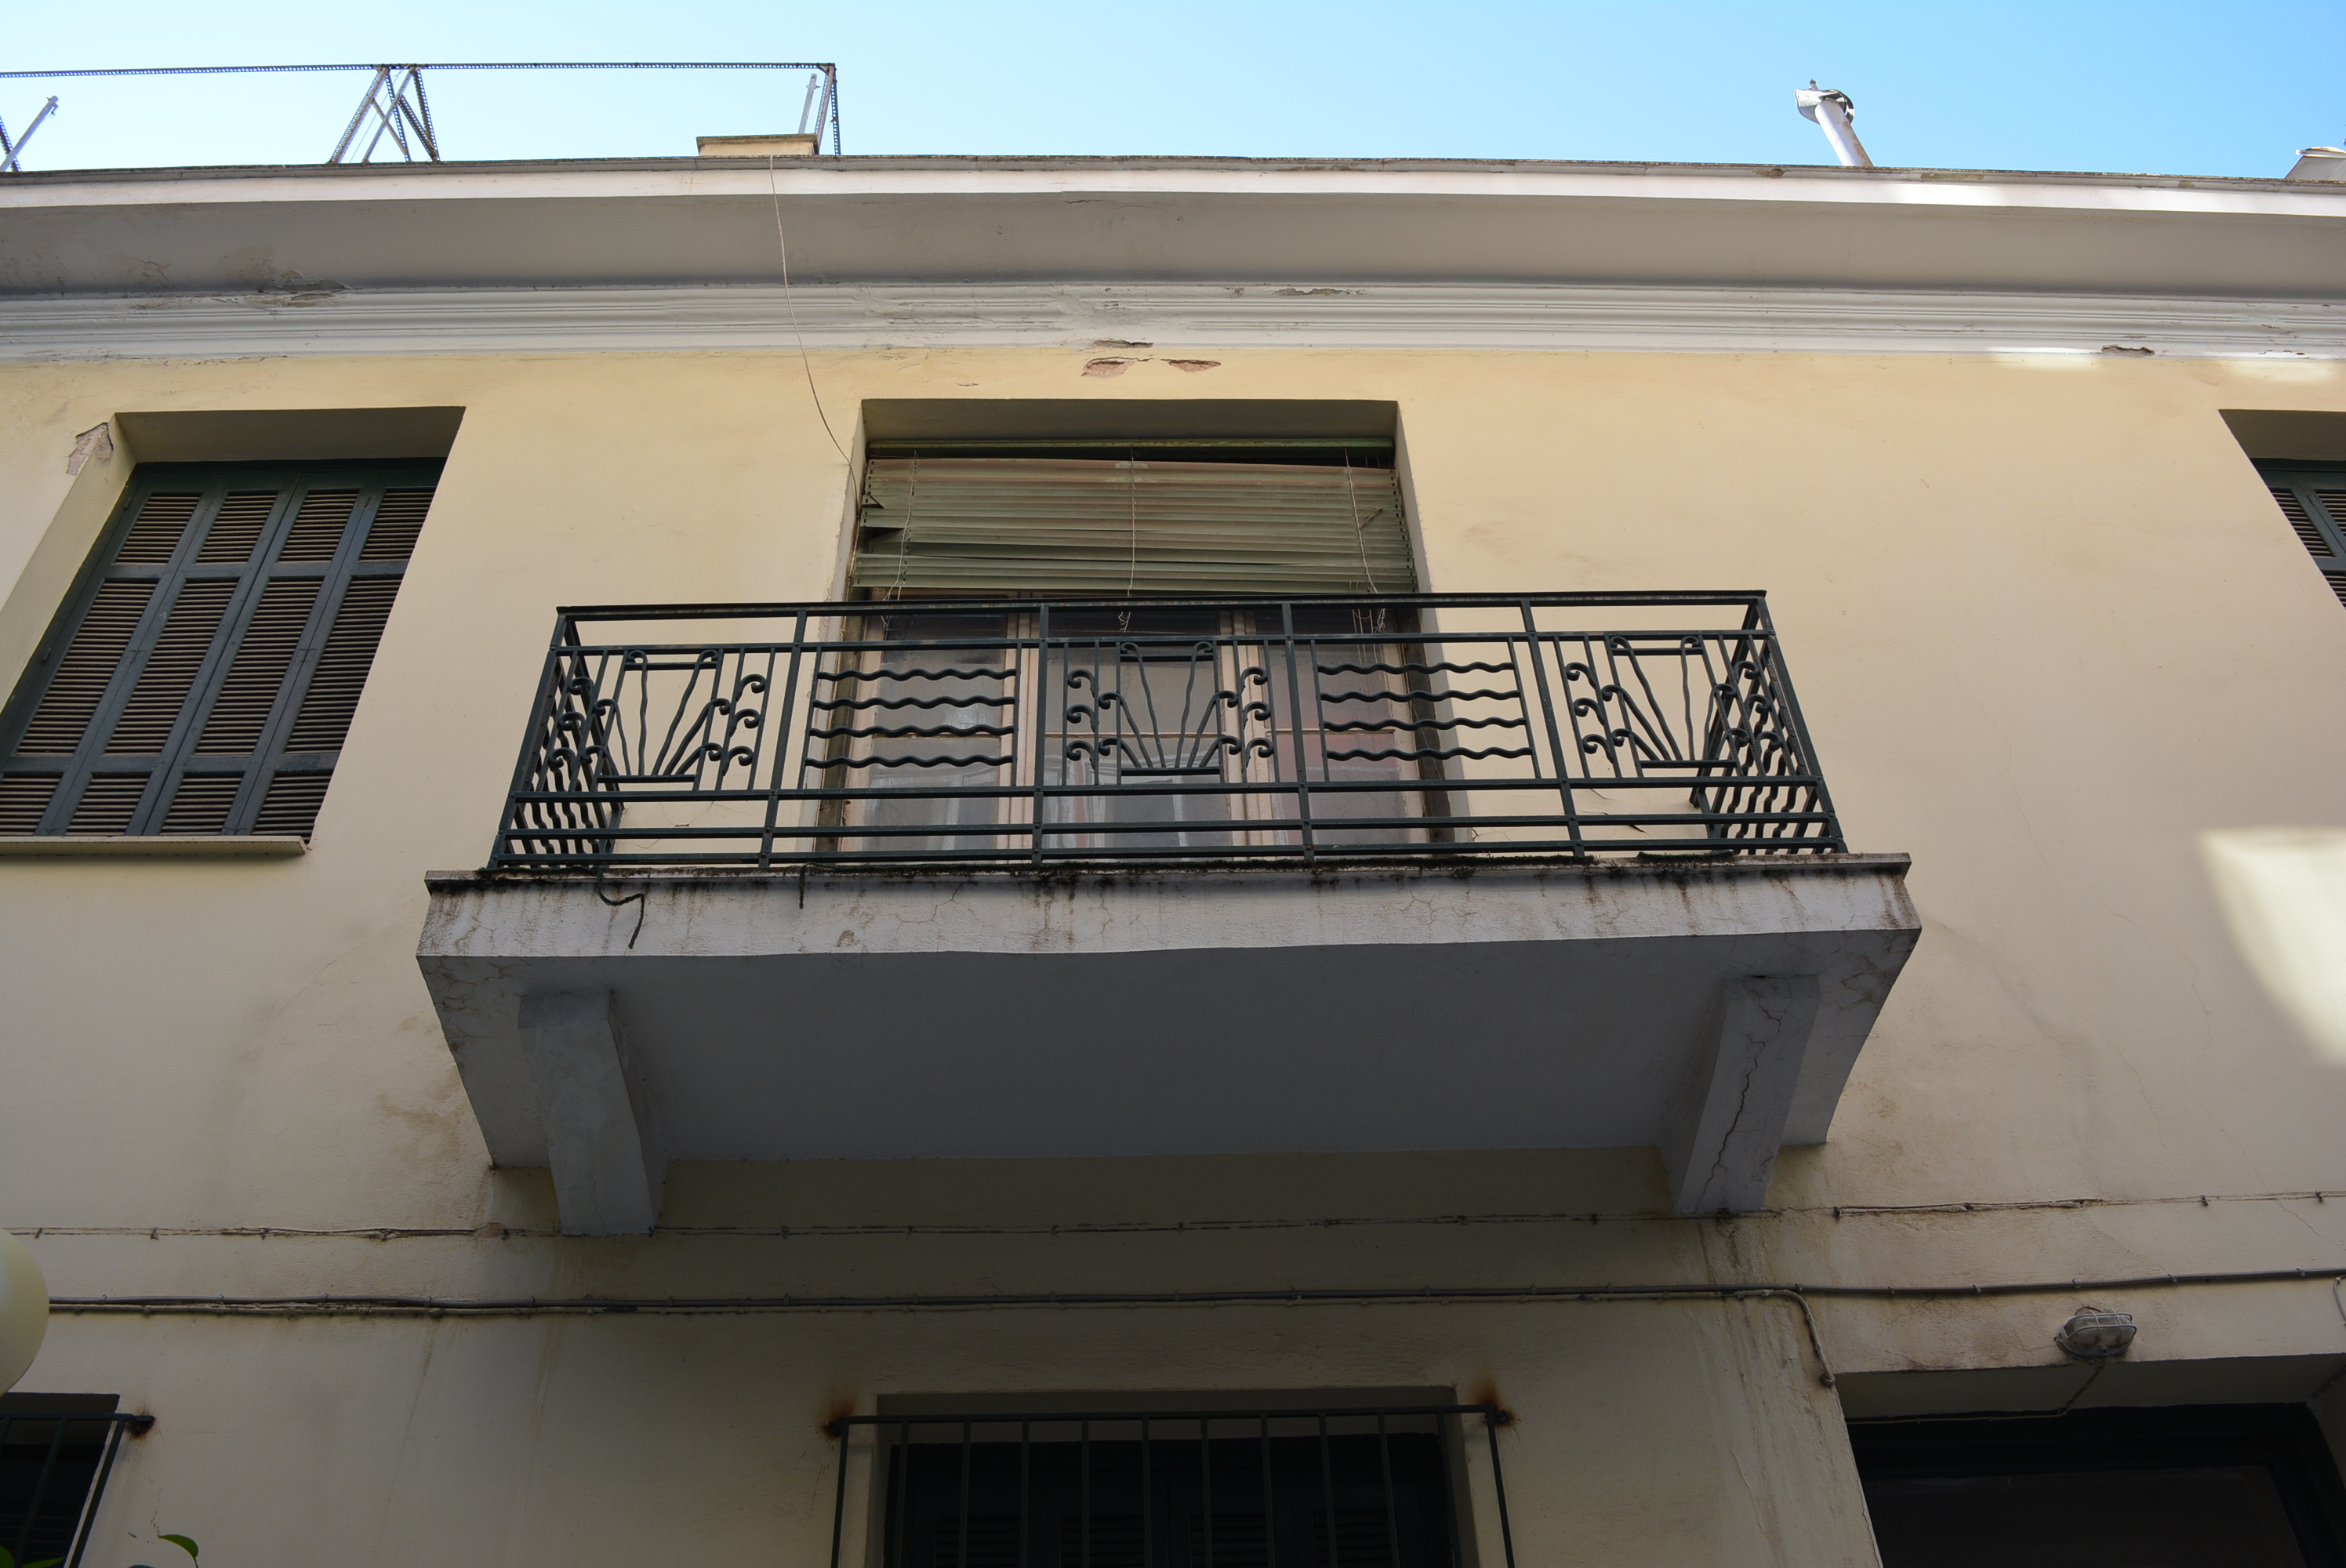 General view of the balcony (2015)